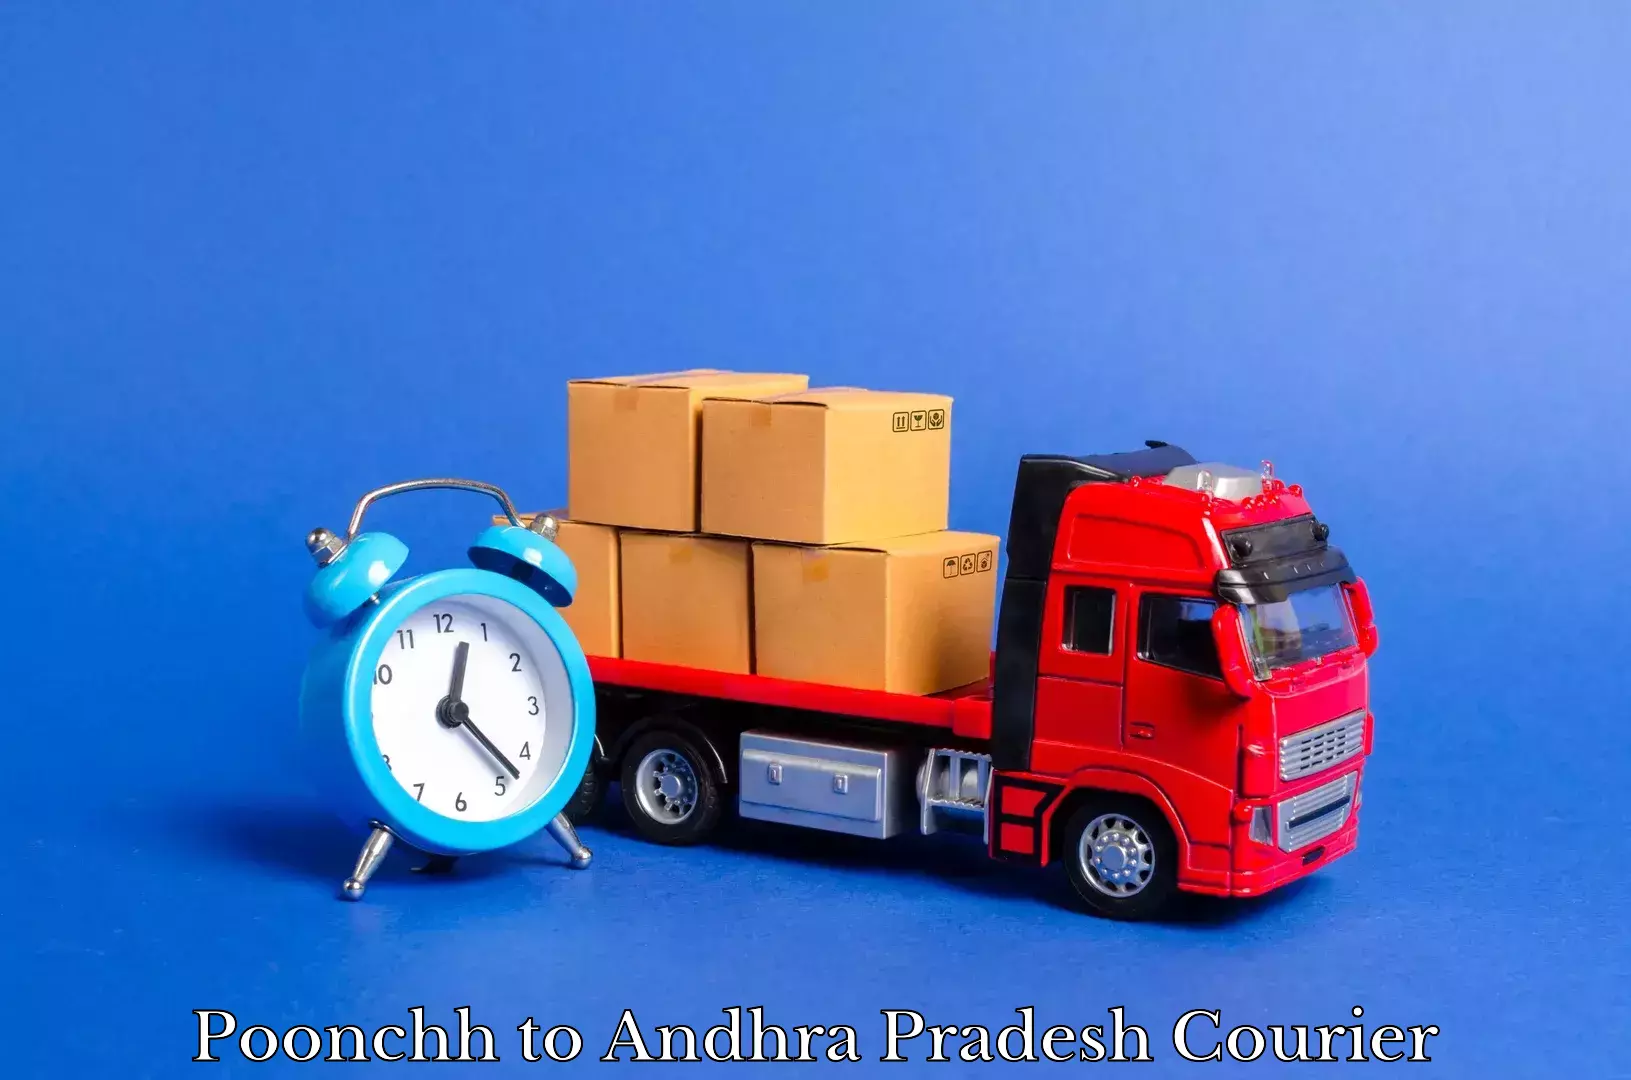 Furniture transport service Poonchh to Narpala